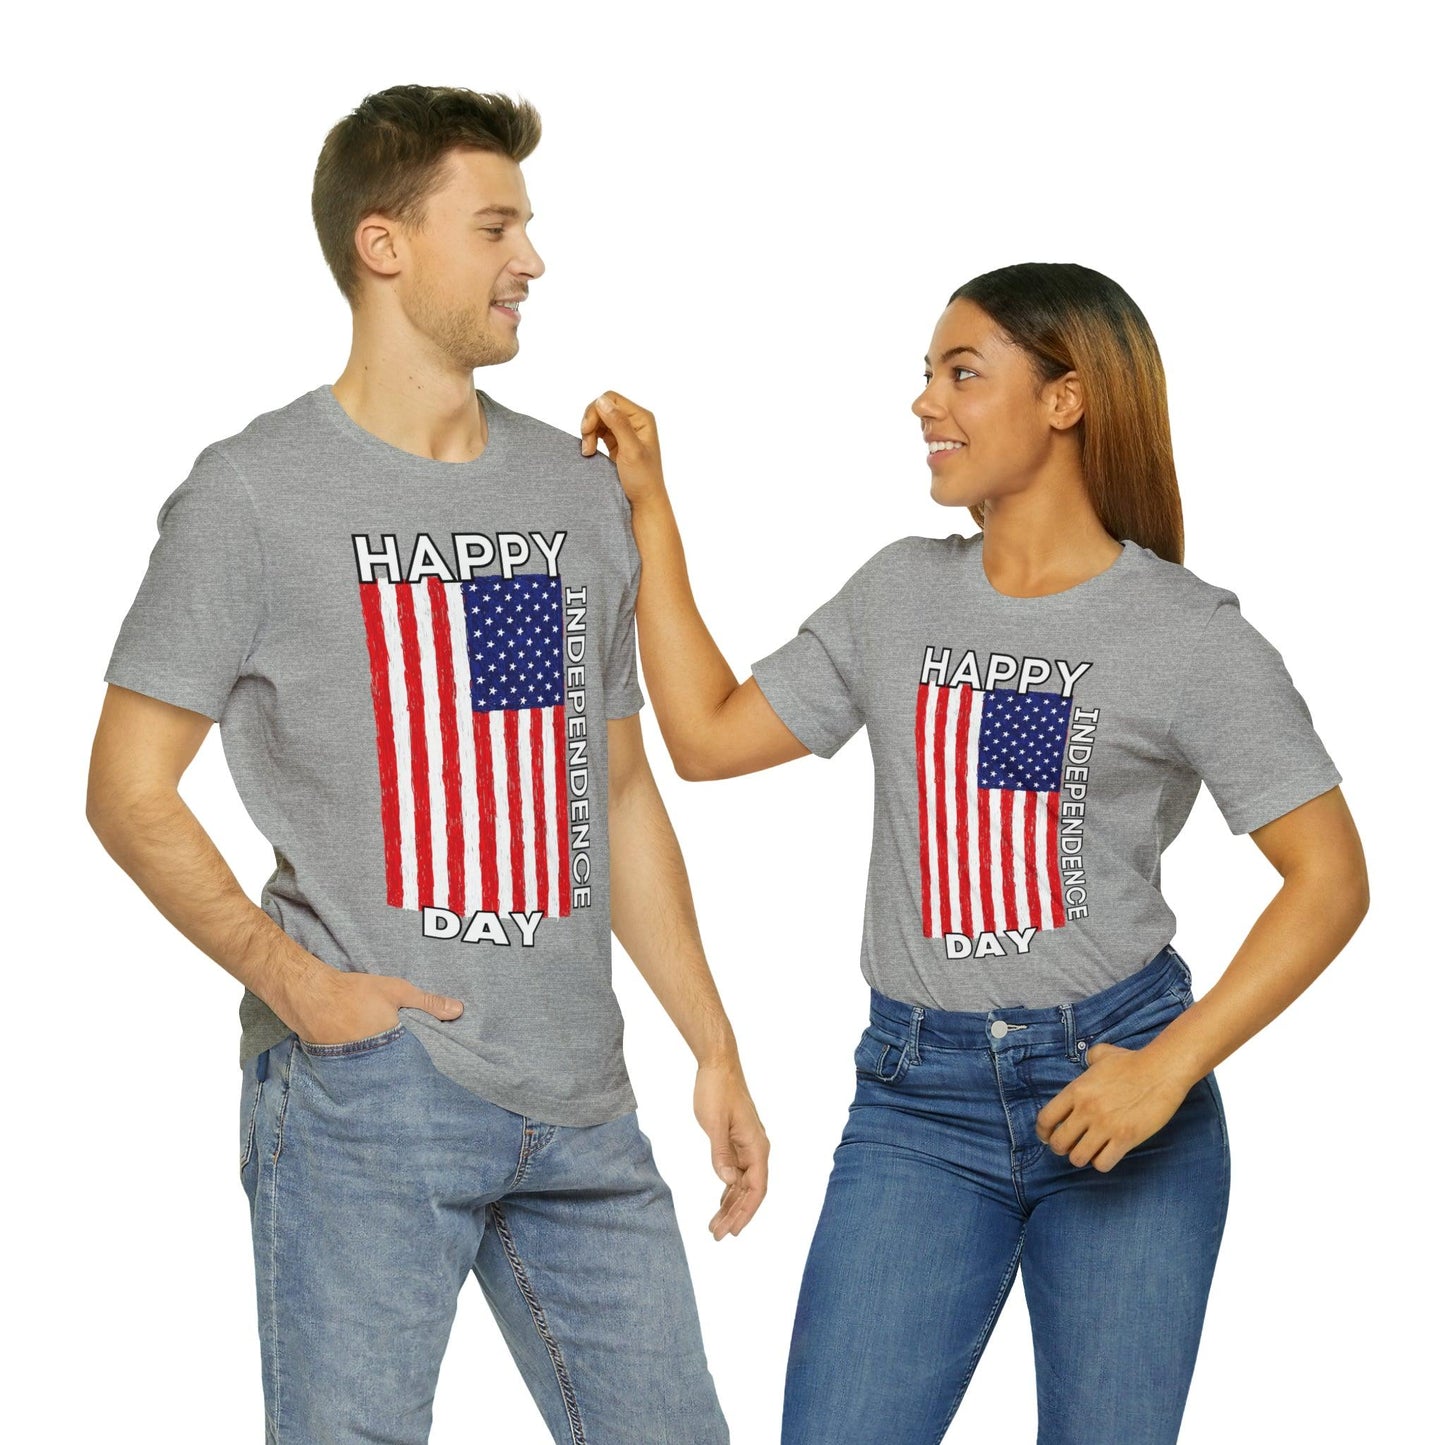 Show Your Patriotism with USA Flag Shirts: Independence Day, Fireworks, Freedom - Perfect for Women and Men on 4th of July - Giftsmojo